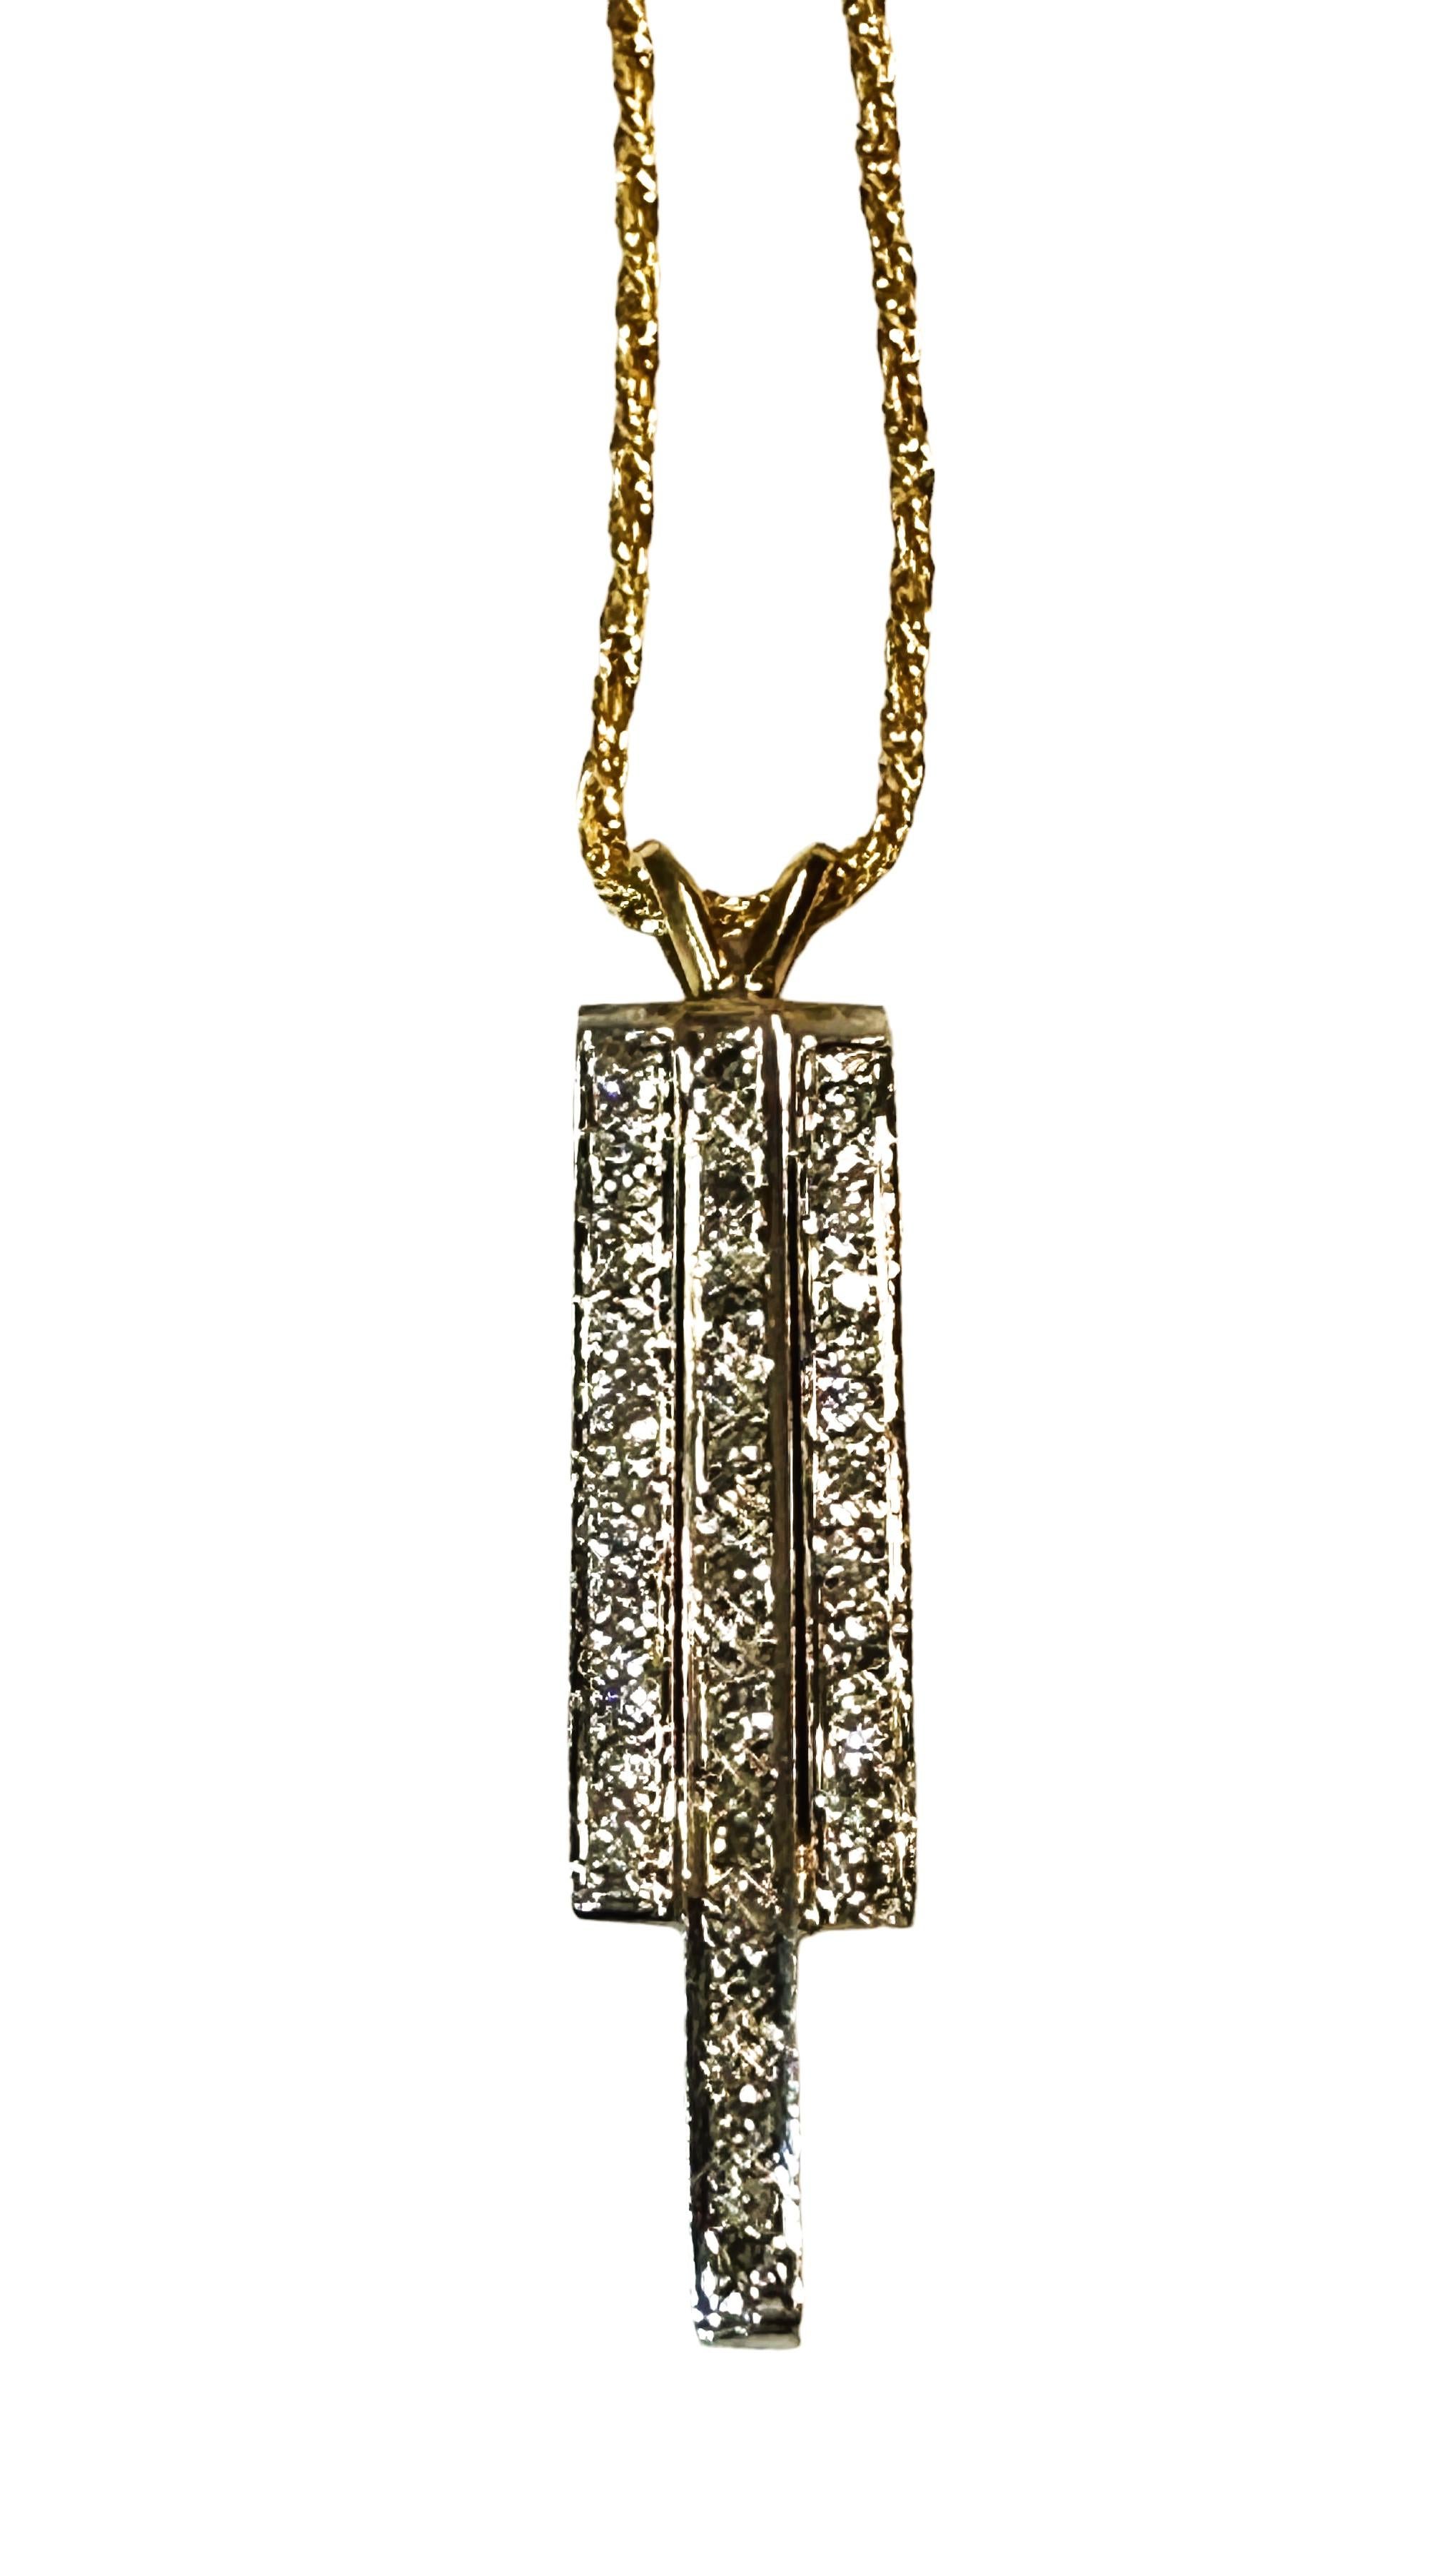 Brilliant Cut Italian Modern 14k Two Tone Gold 1.25 ct Diamond Necklace with Appraisal